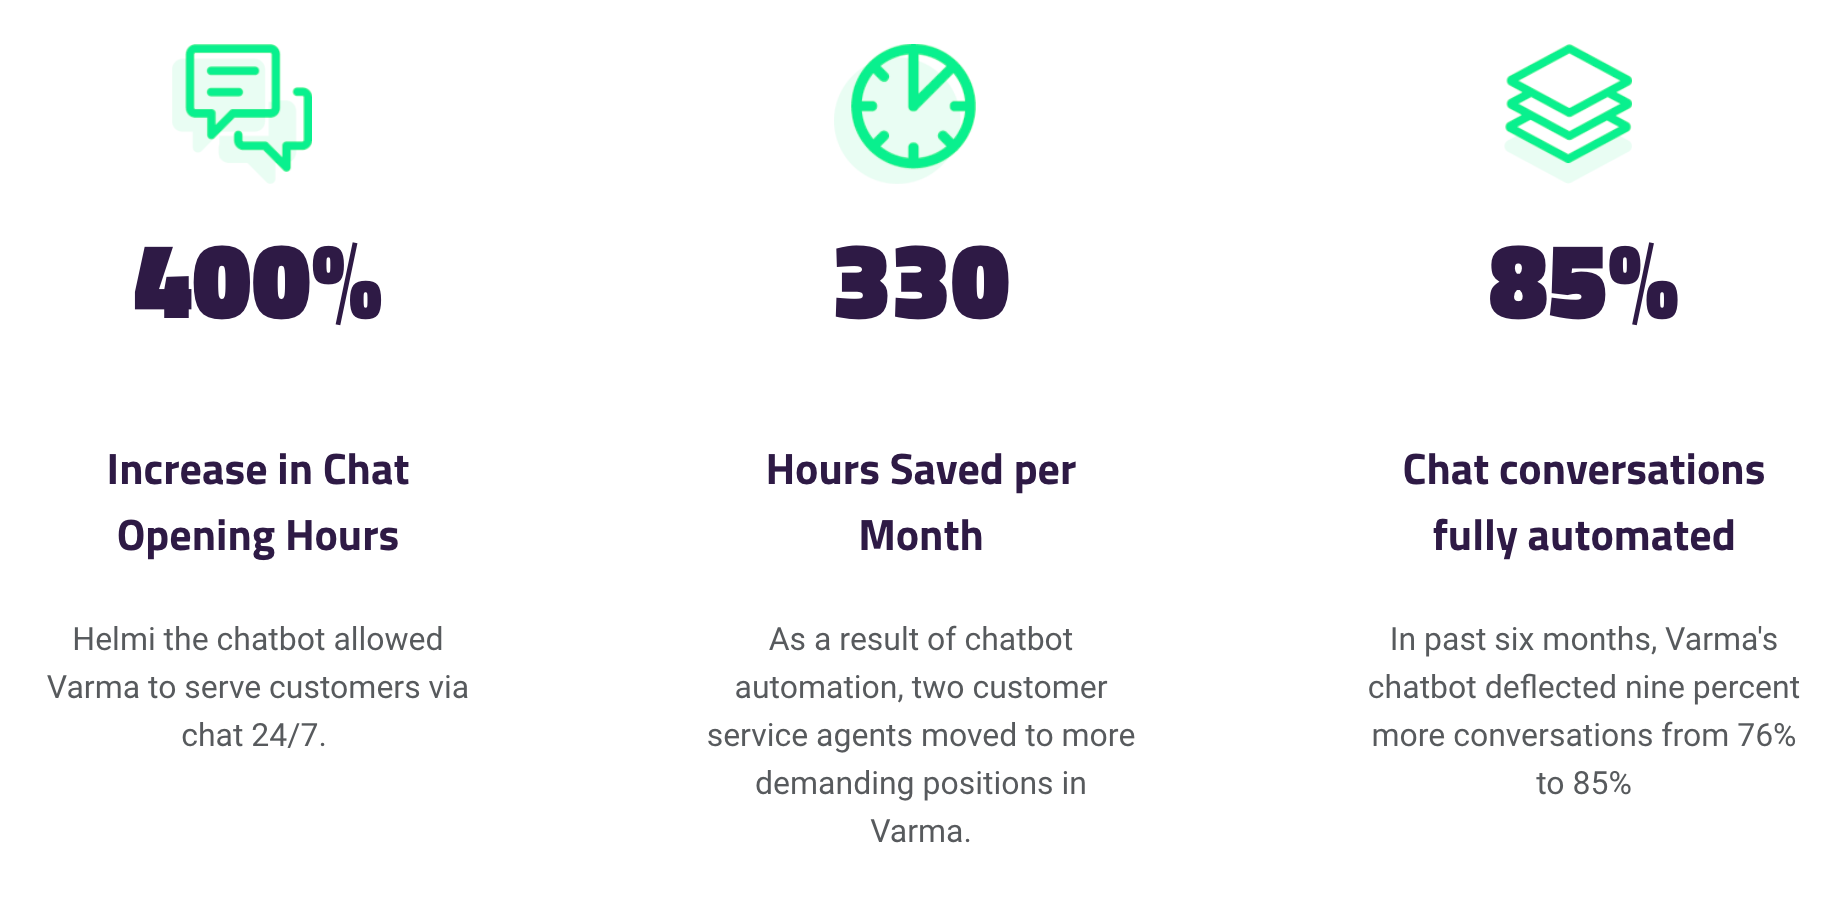 AI Chatbot Results 330 hours saved per month Varma and GetJenny